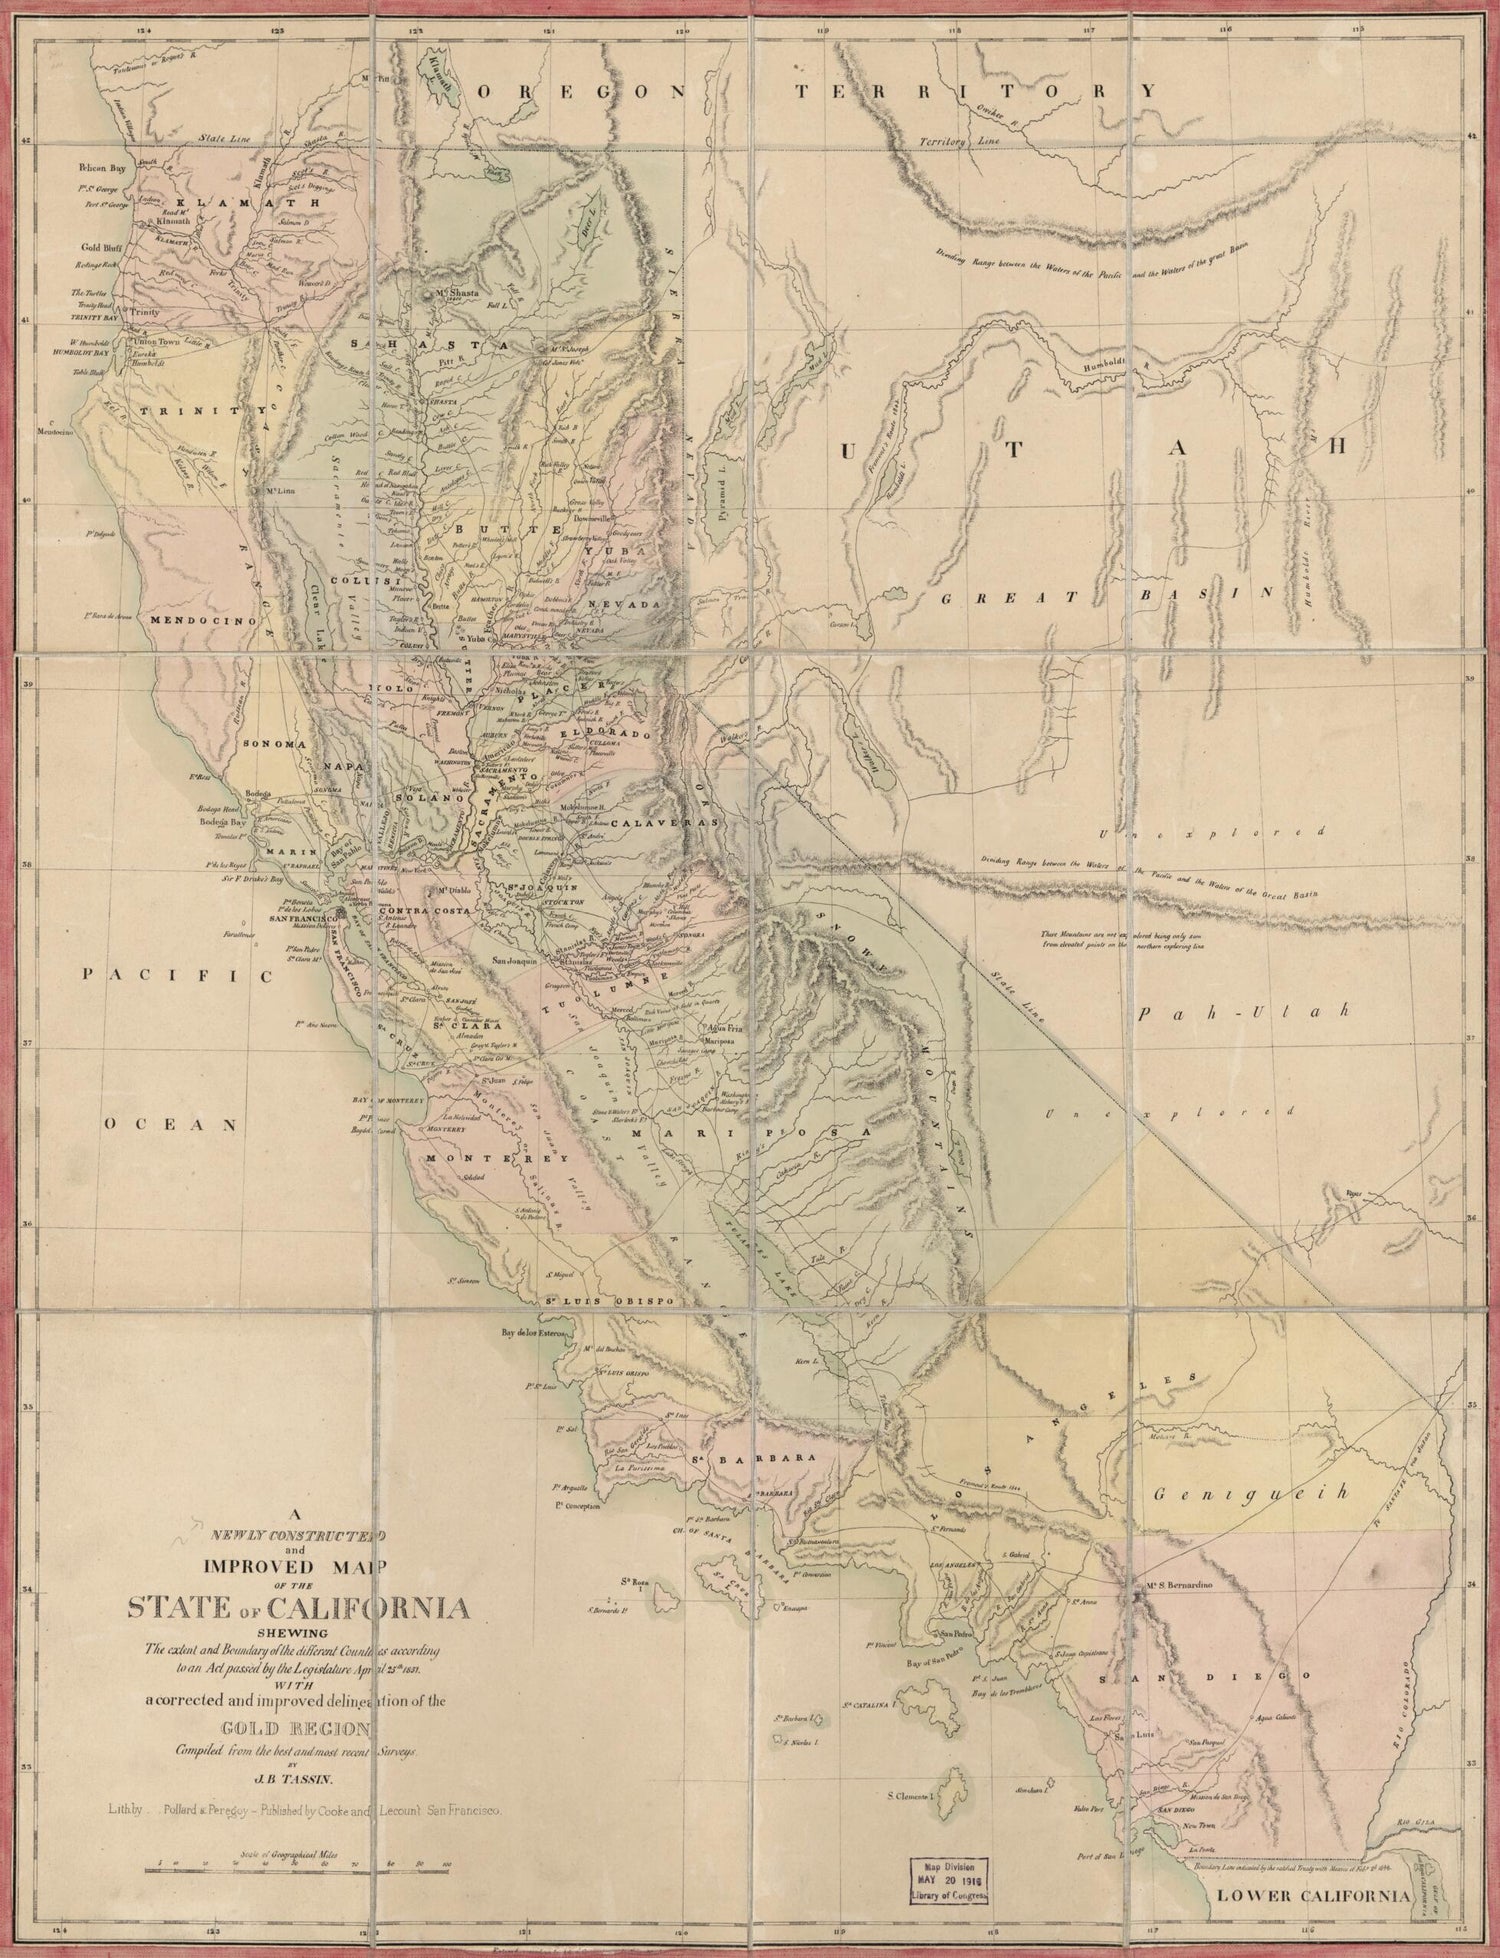 This old map of A Newly Constructed and Improved Map of the State of California : Shewing the Extent and Boundary of the Different Counties According to an Act Passed by the Legislature April 25th, from 1851 With a Corrected and Improved Delineation of t